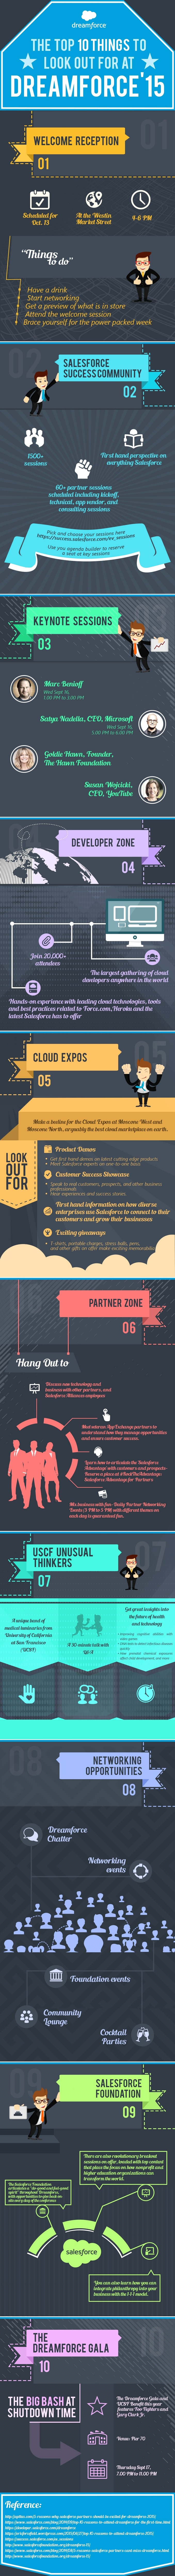 Top 10 things to look out for at Dreamforce 2015 - Infographic